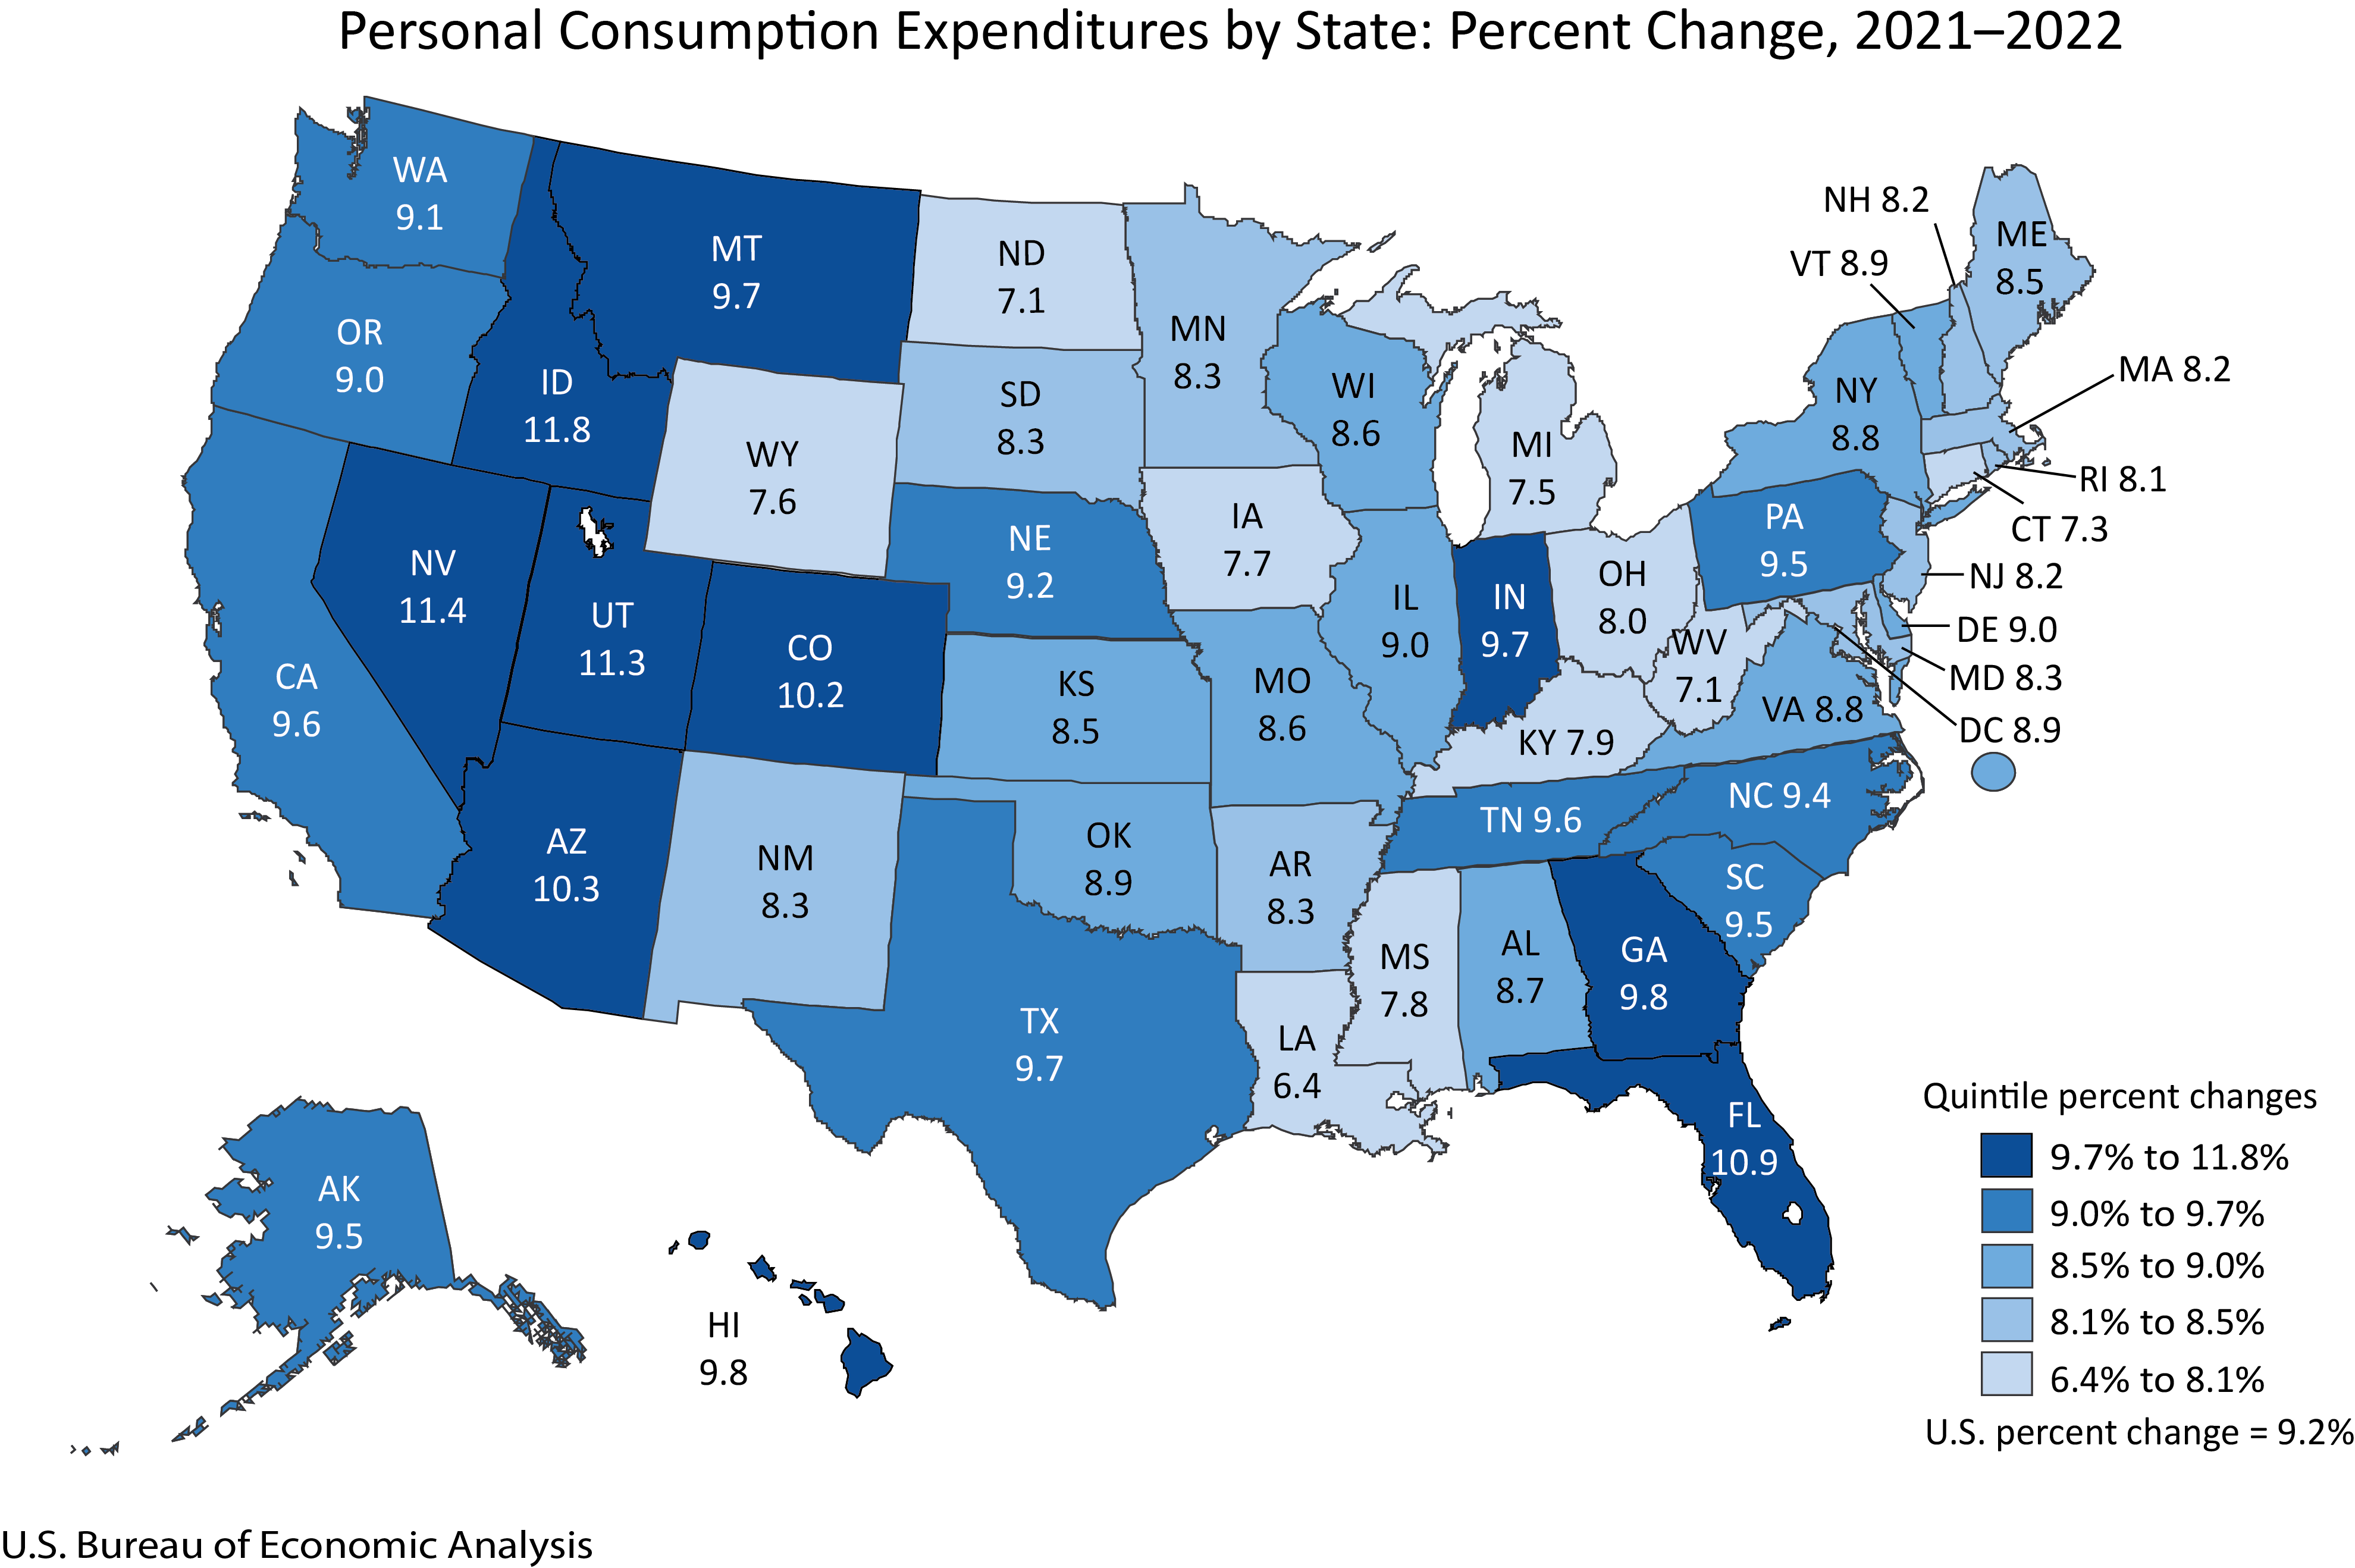 Personal Consumption Expenditures by State: Percent Change, 2021-2022